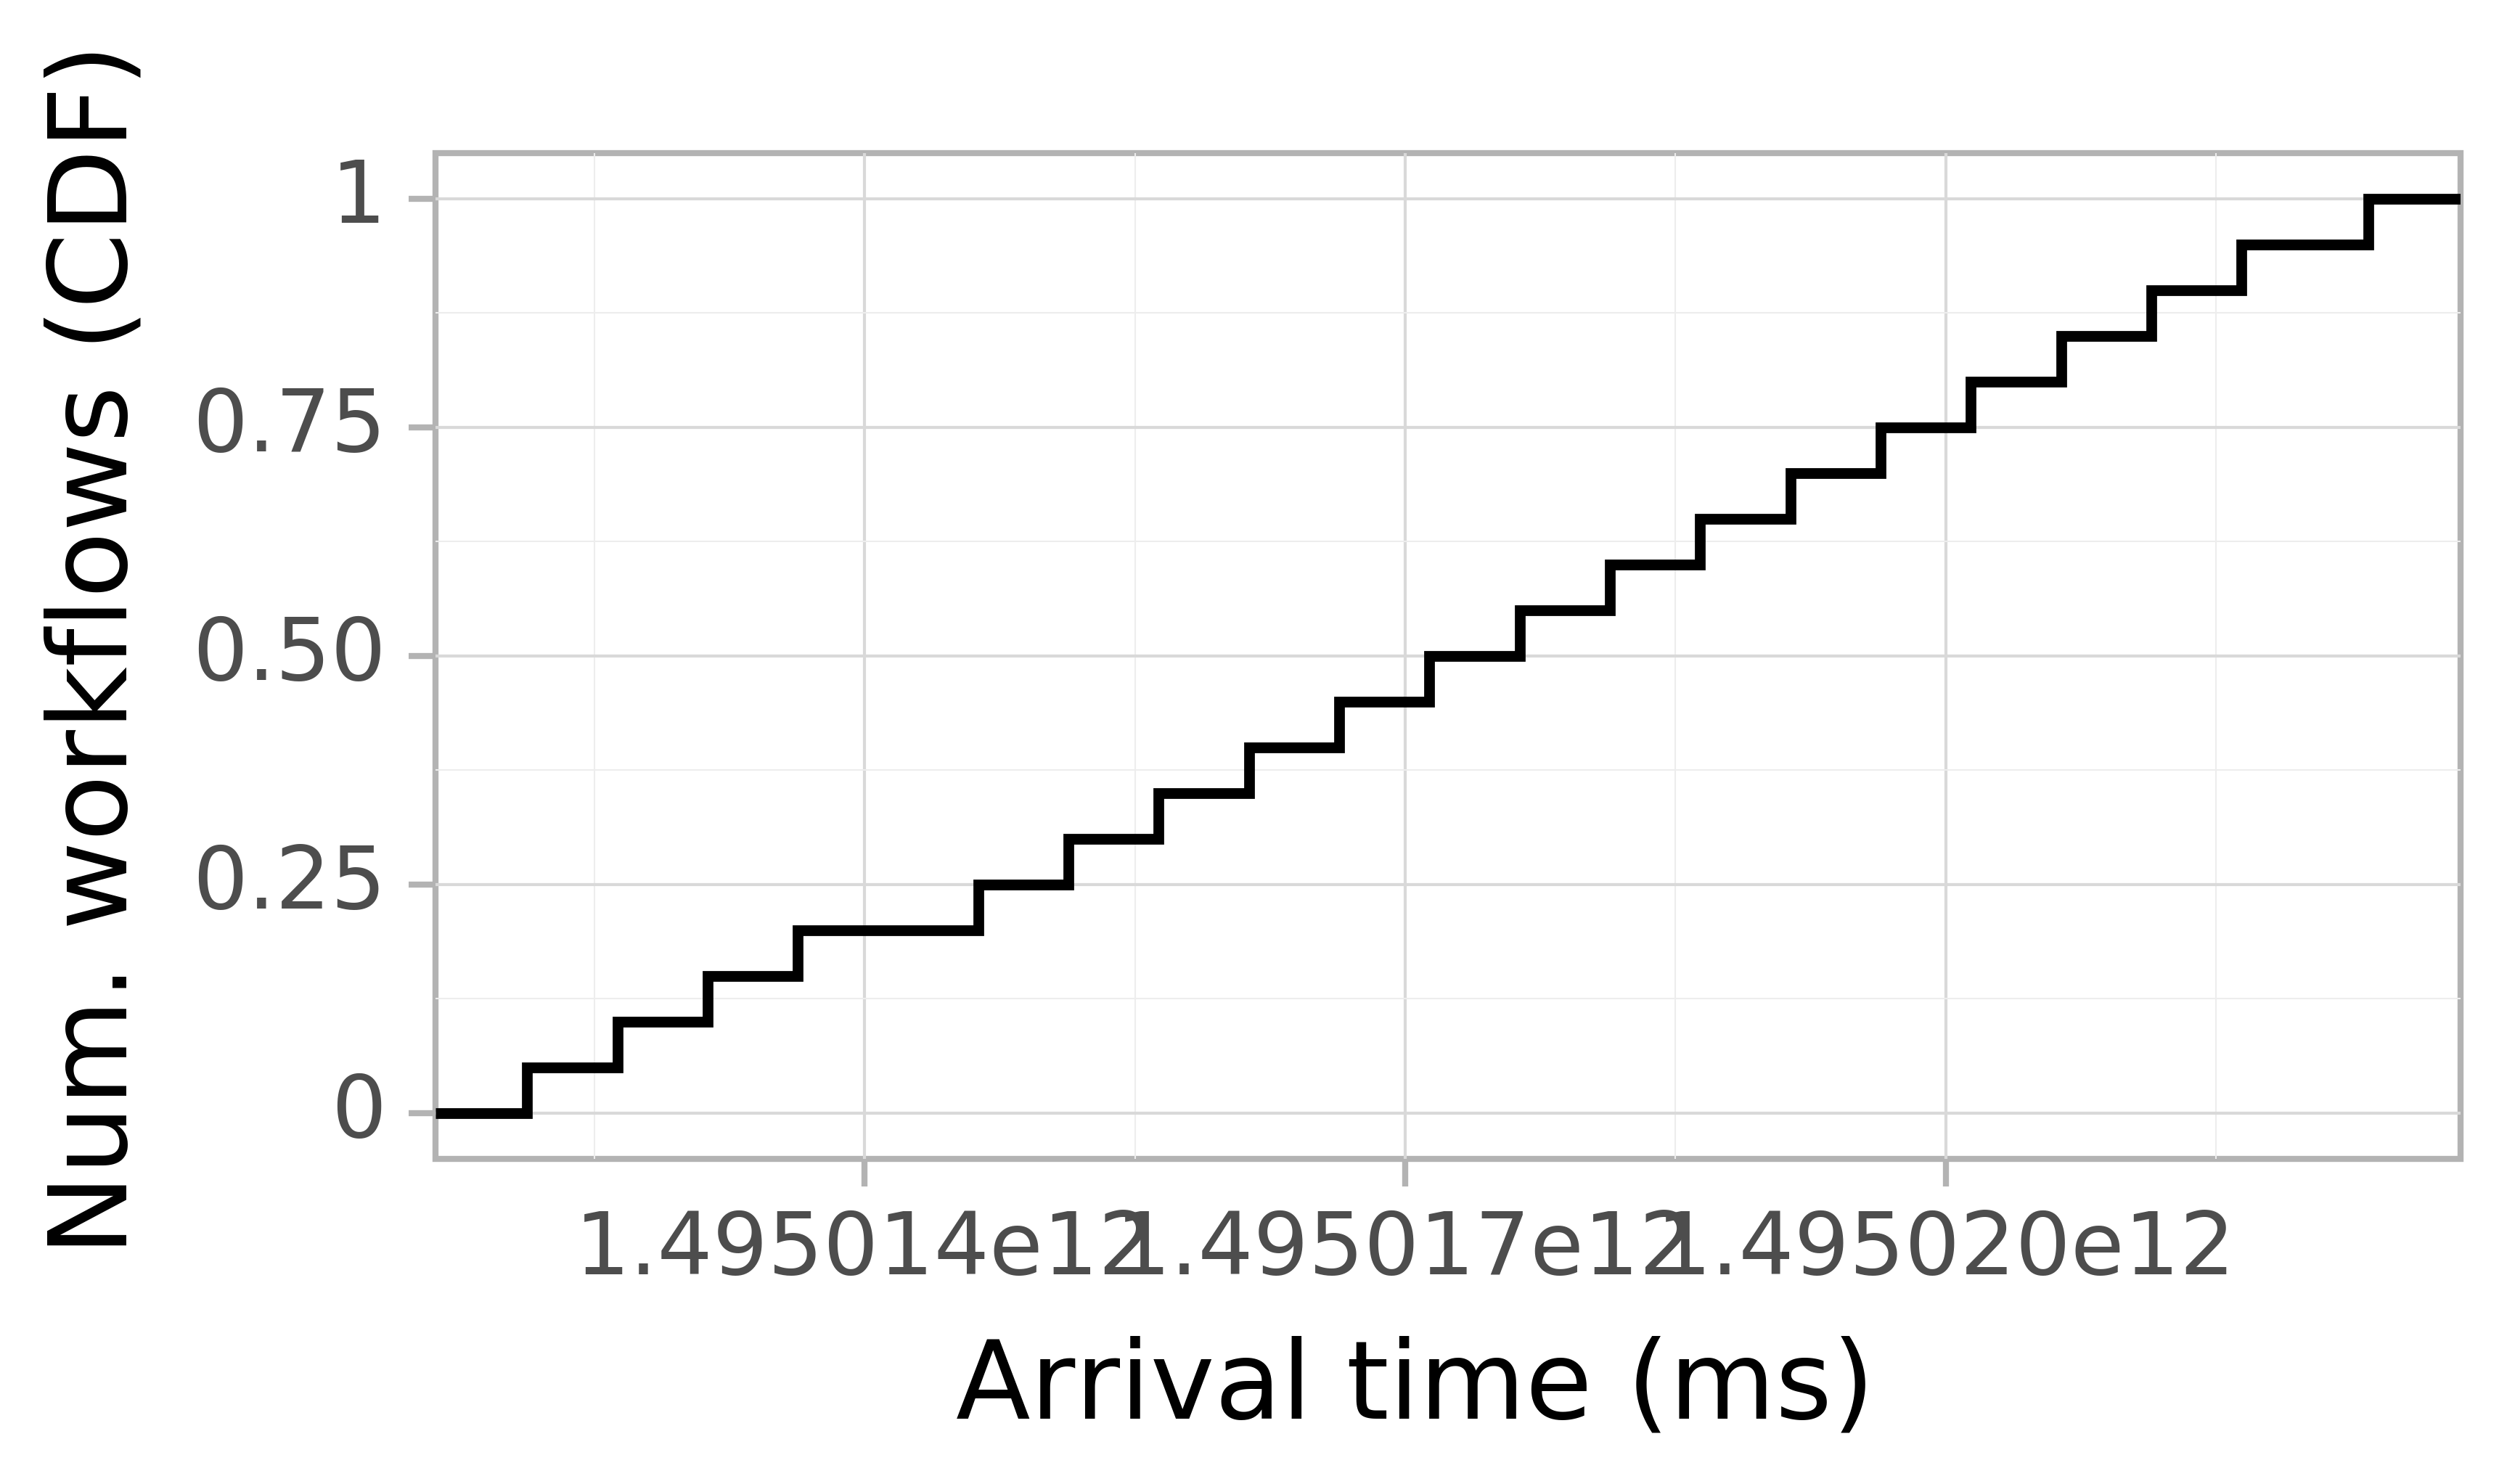 Job arrival CDF graph for the askalon-new_ee59 trace.